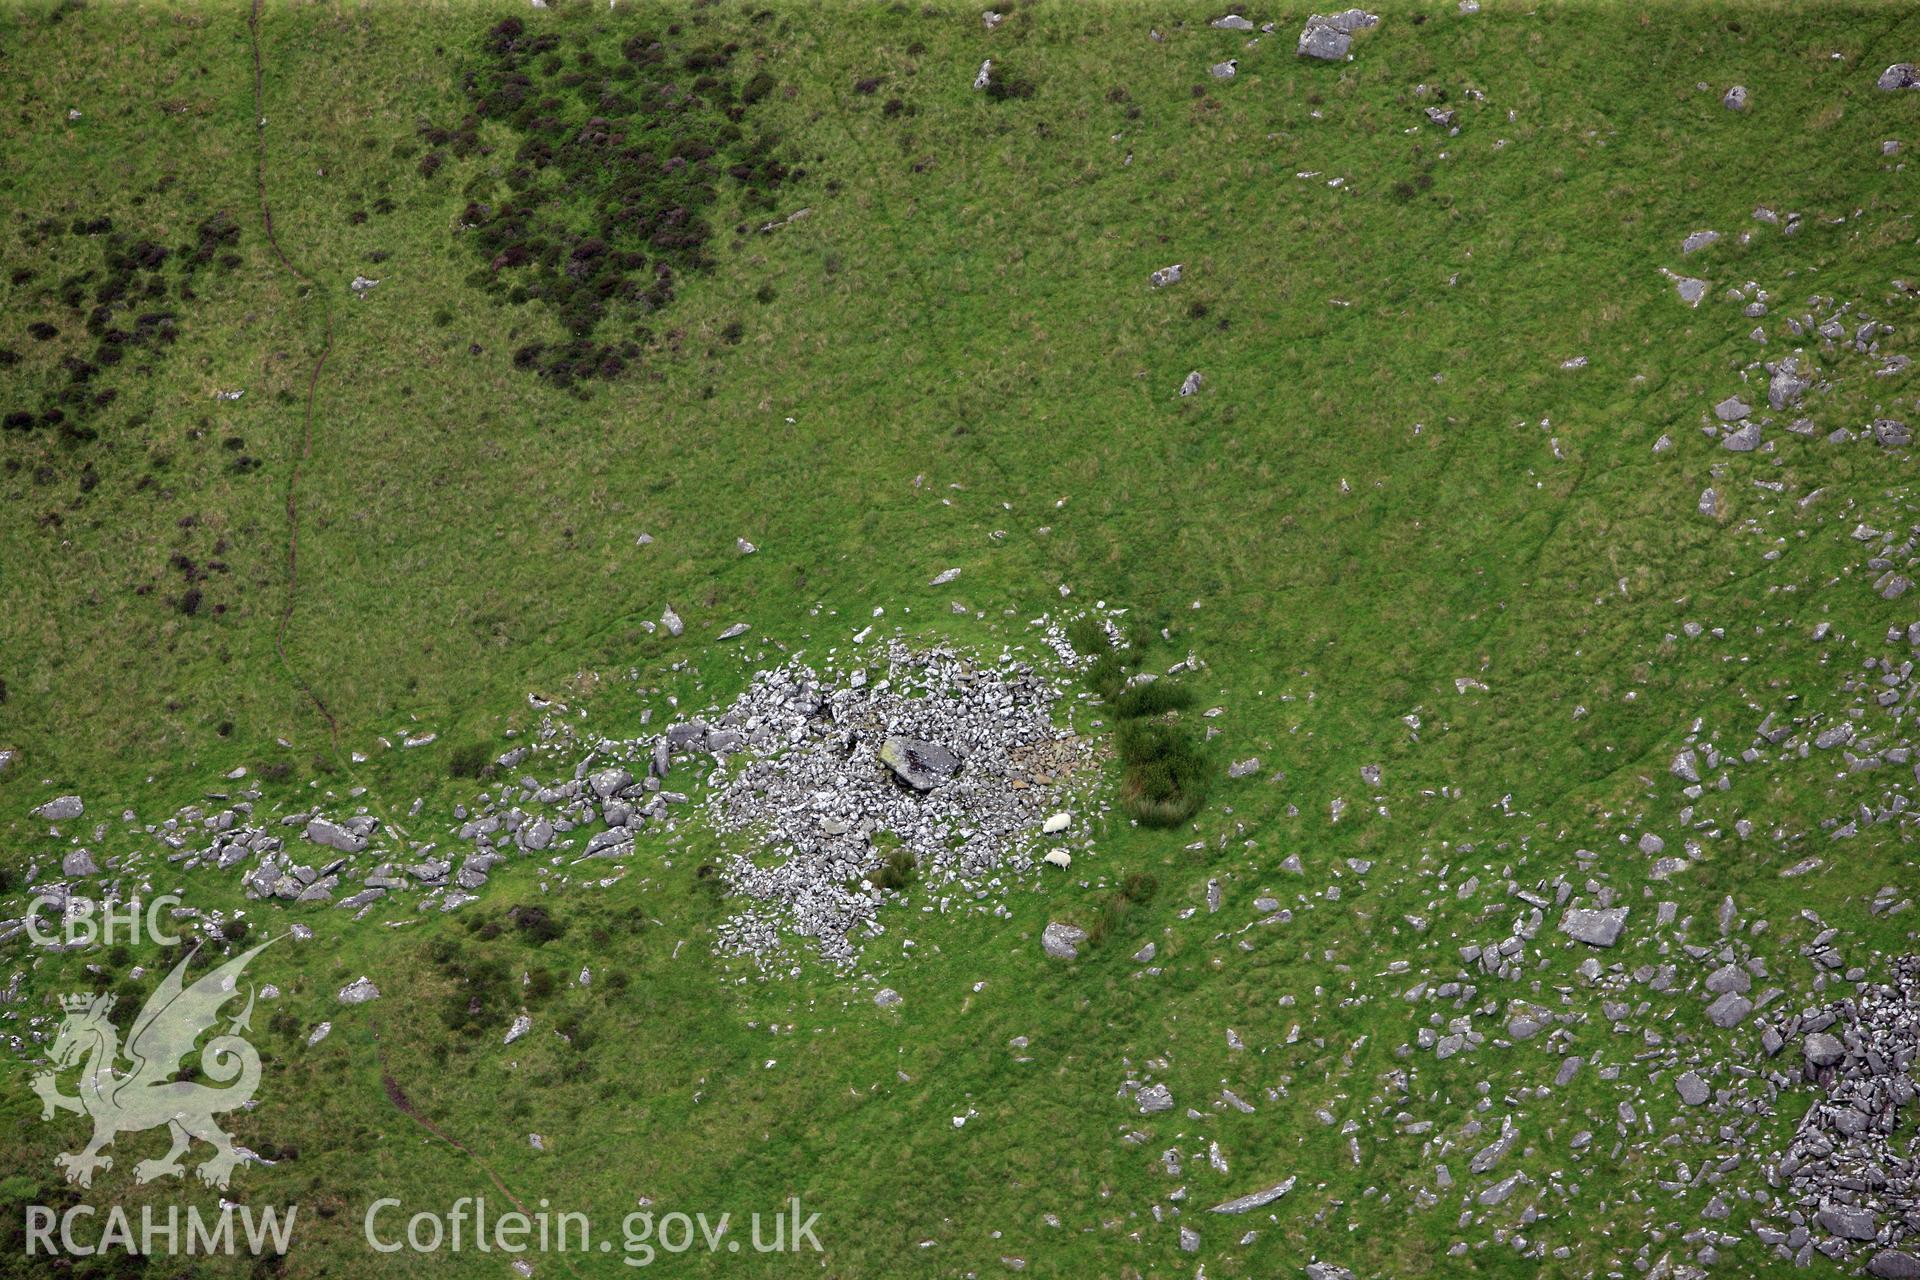 RCAHMW colour oblique photograph of Carn Menyn Cairn. Taken by Toby Driver on 05/07/2012.